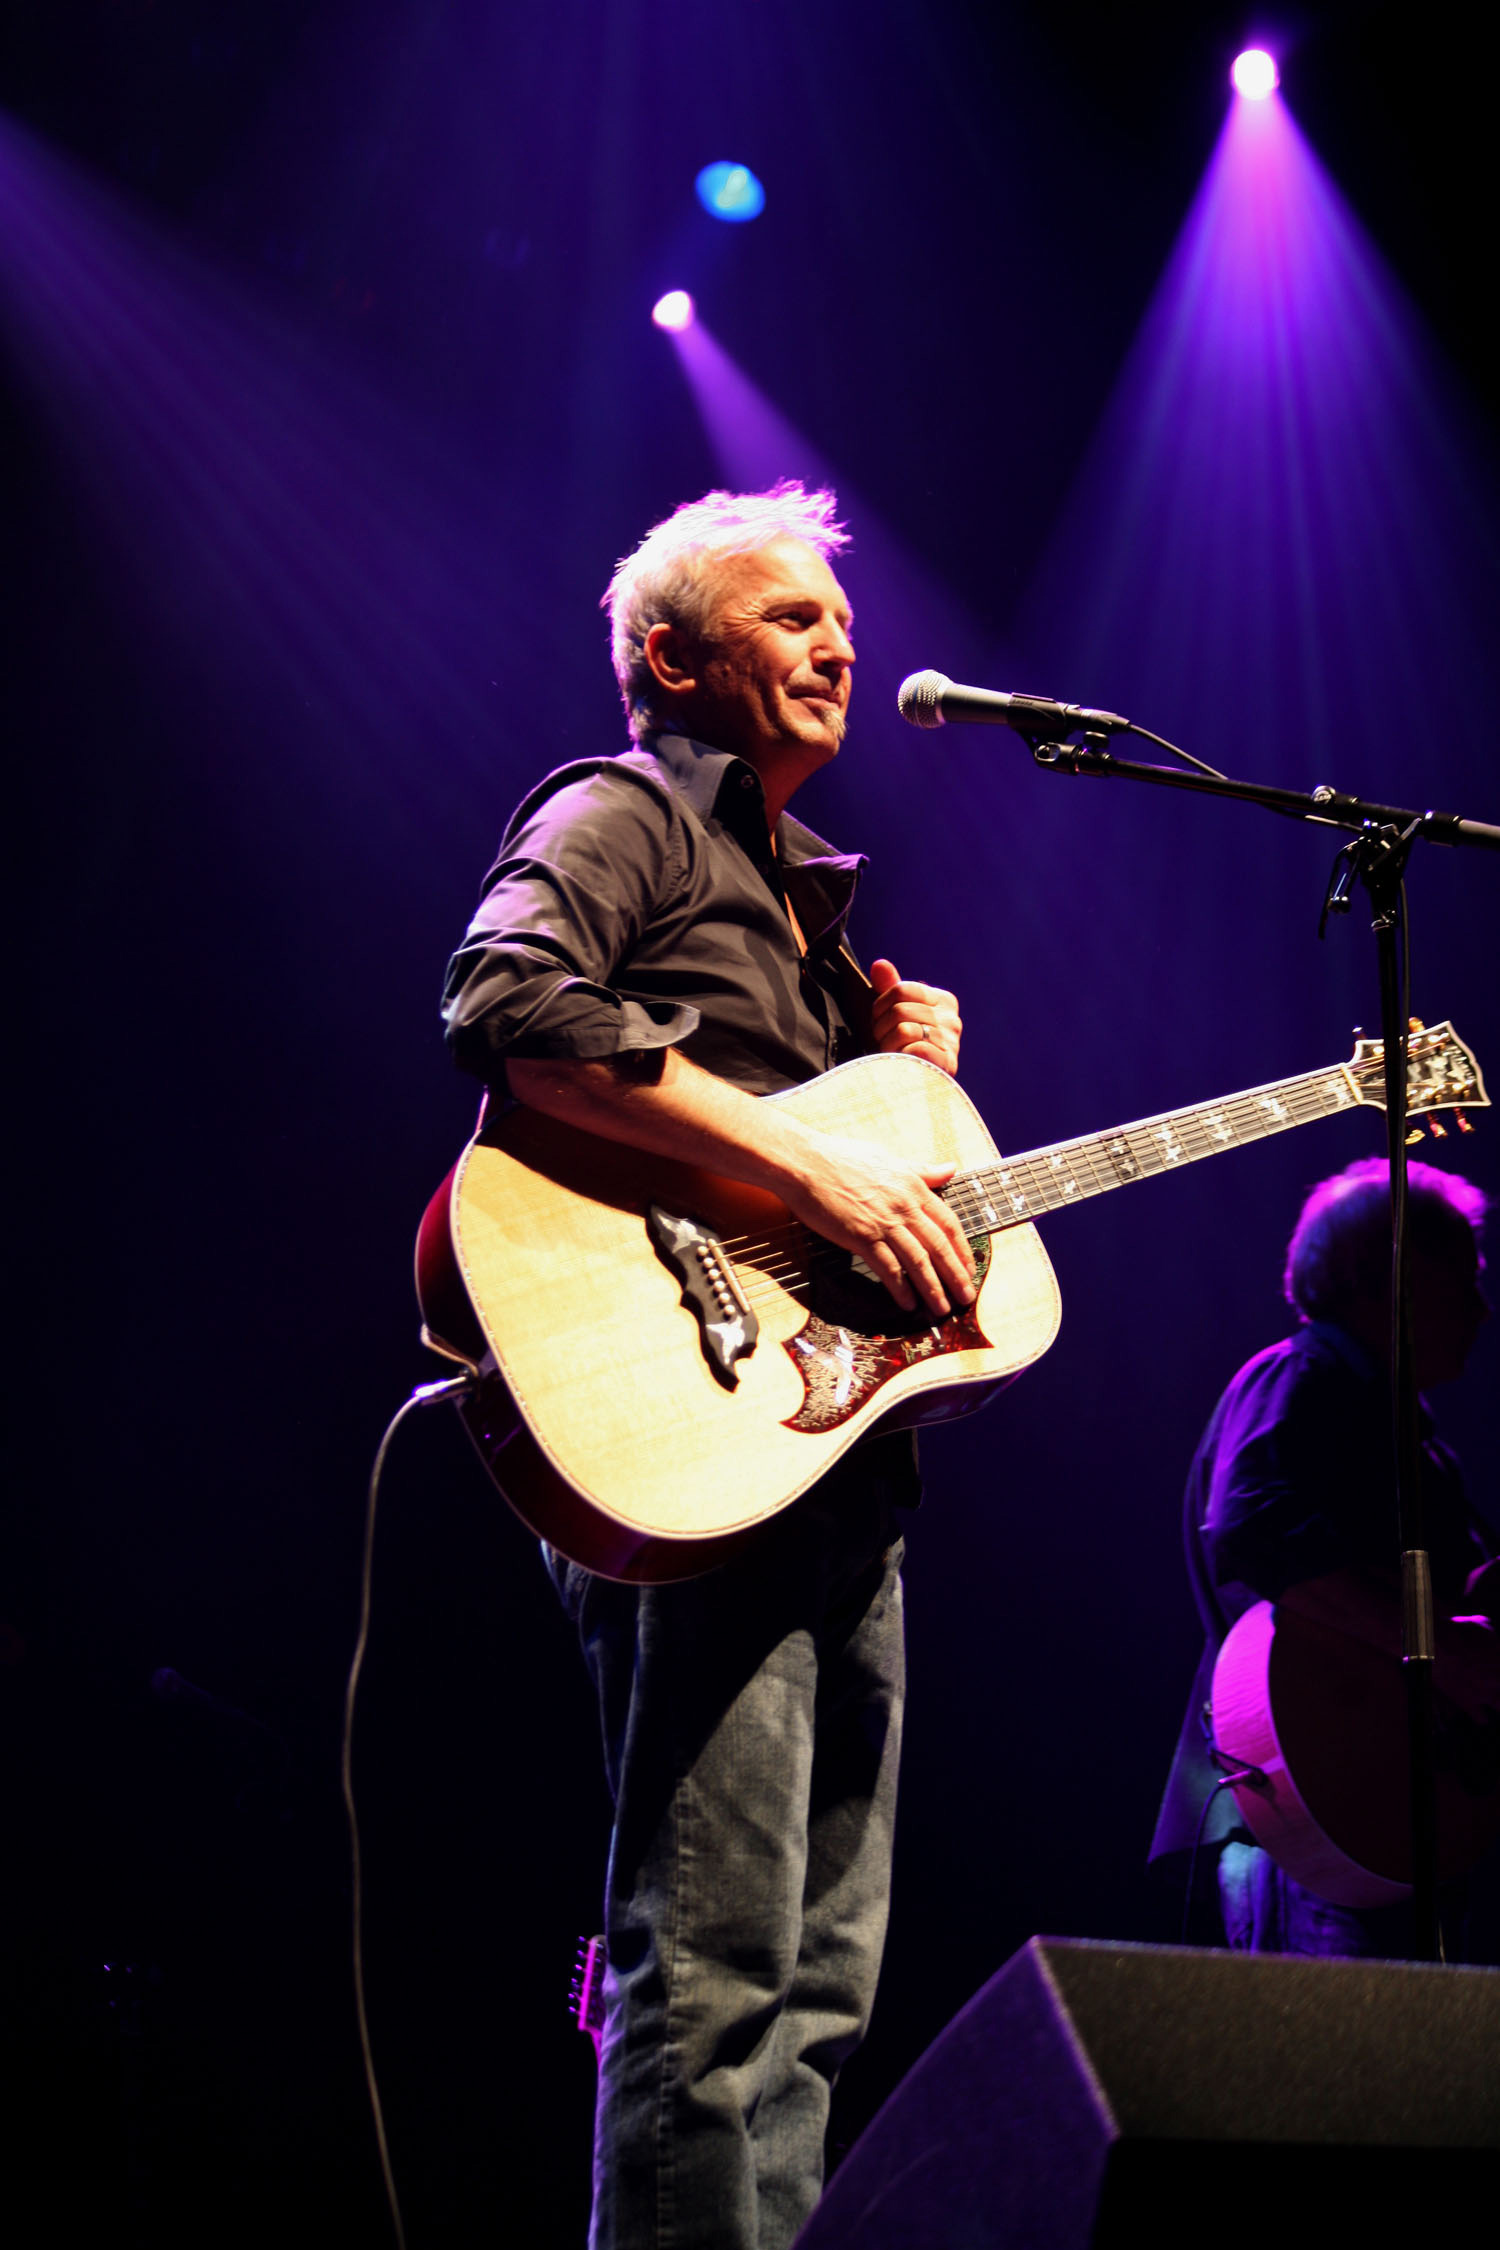 Kevin Costner at Grand Ole Opry